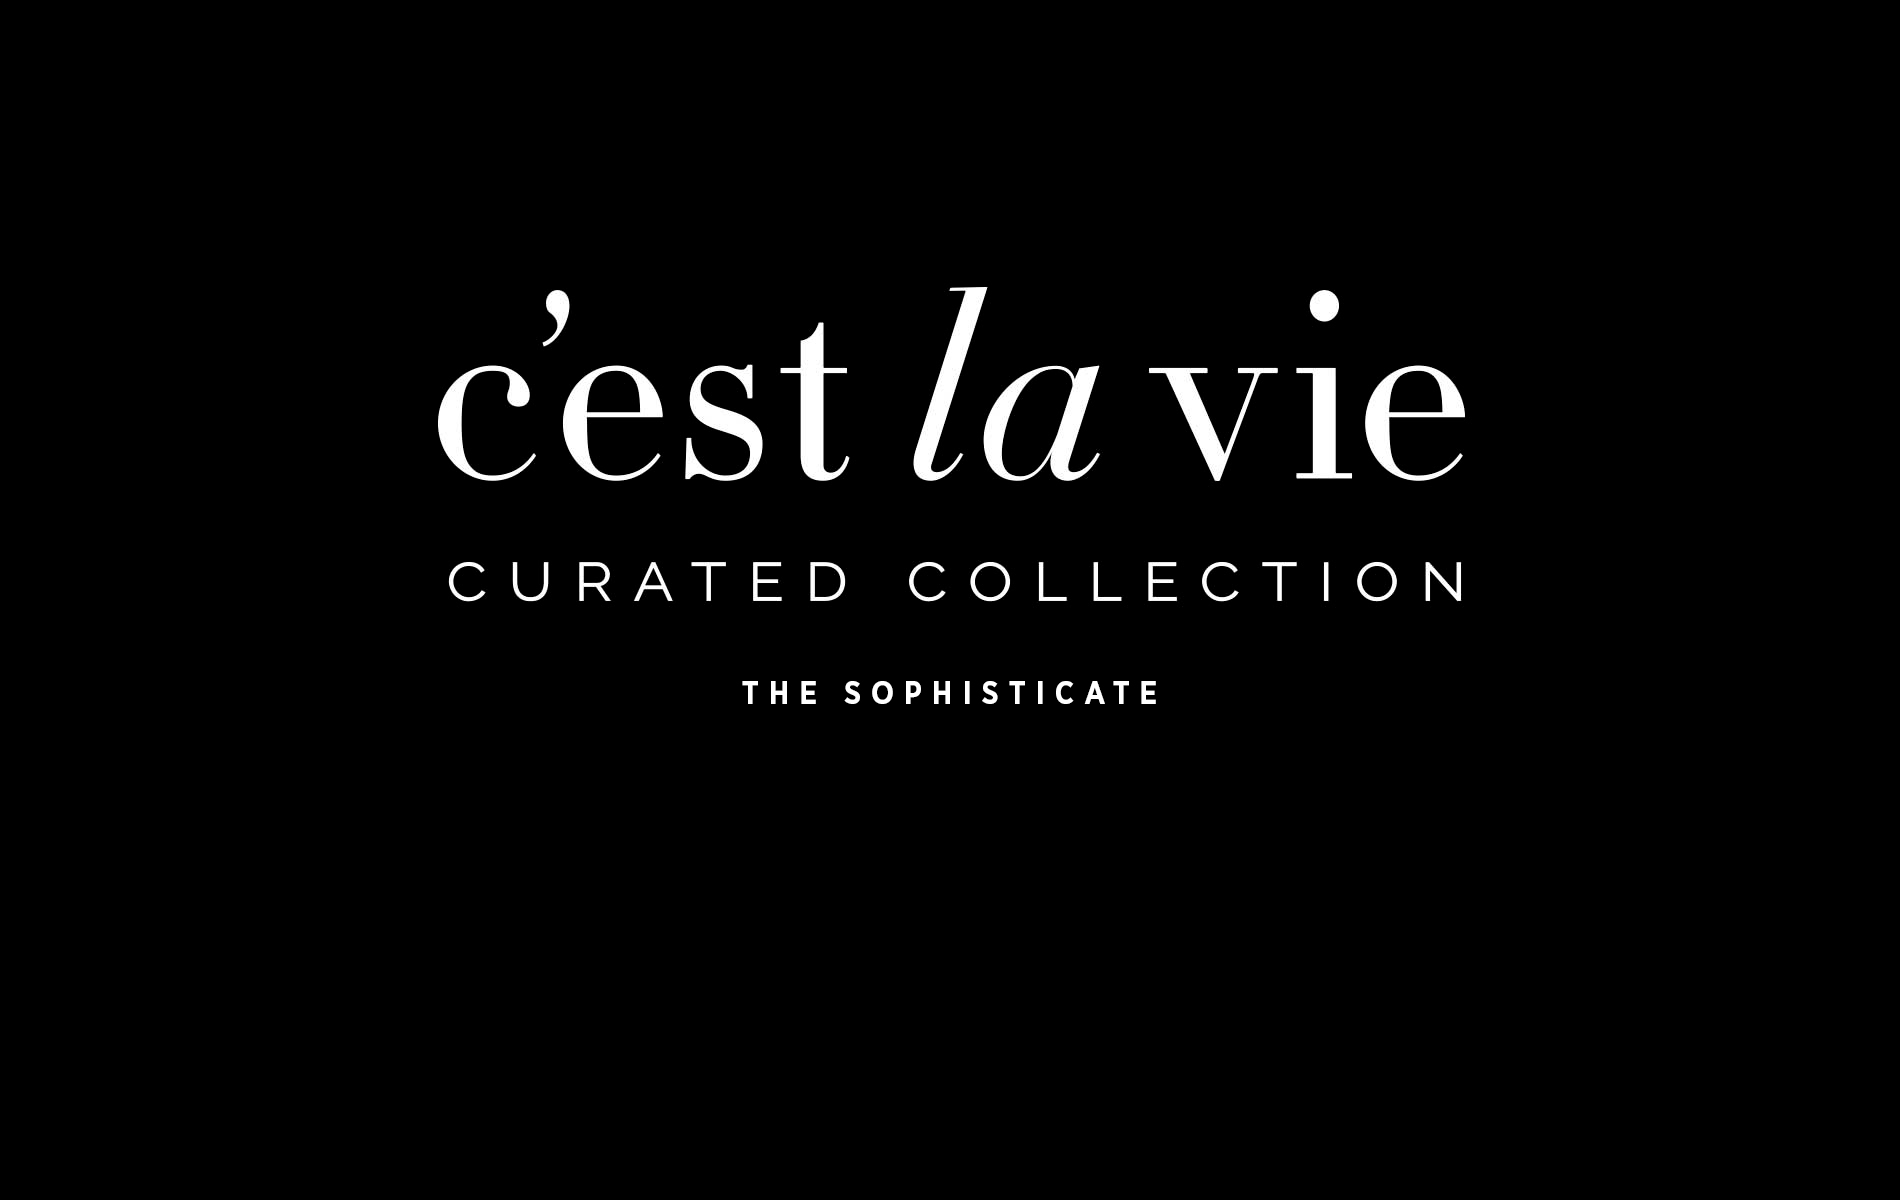 Cest la vie curated collection The Sophisticate Issue 2016 beautiful upscale collections favorite things